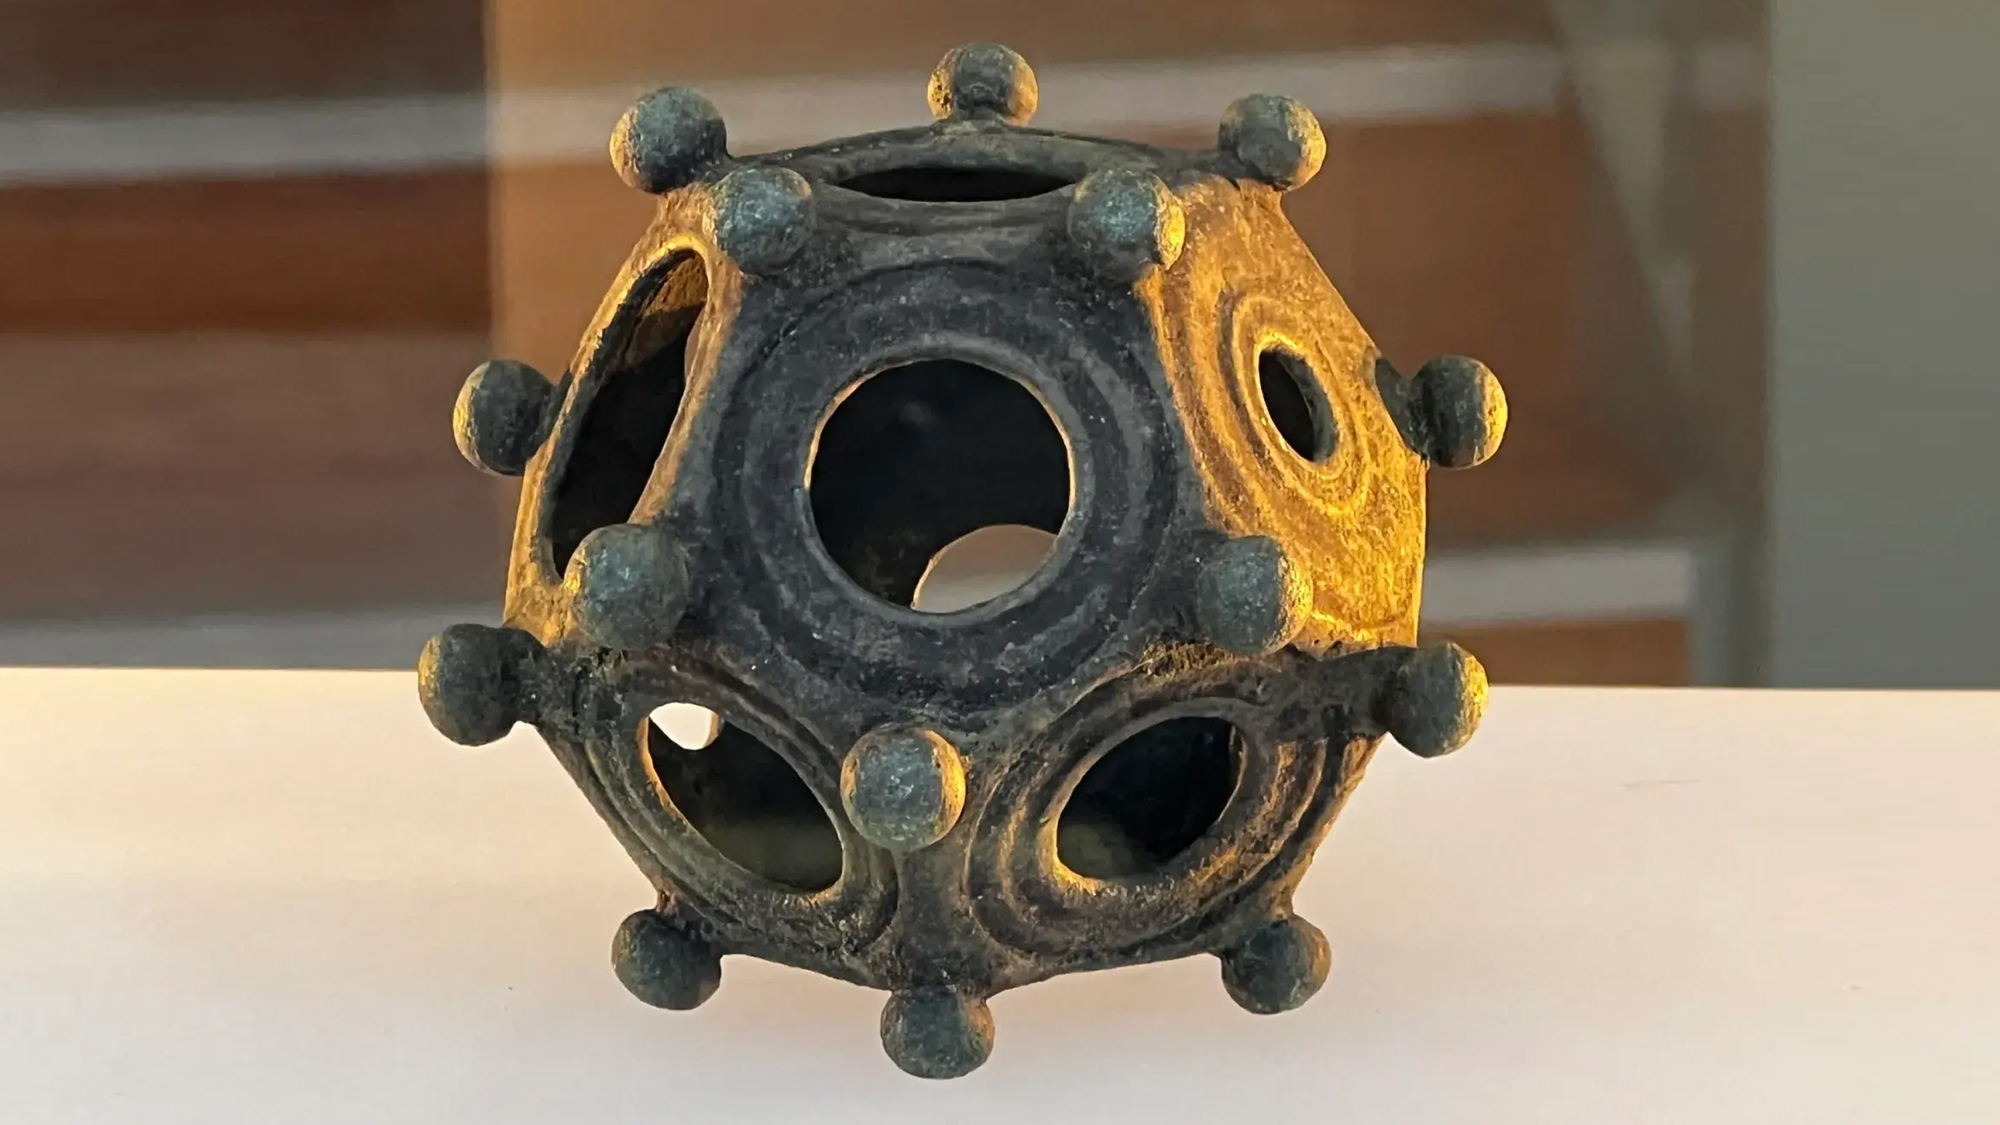 a hollow 12-sided object with knobs on each face on display at a musuem.